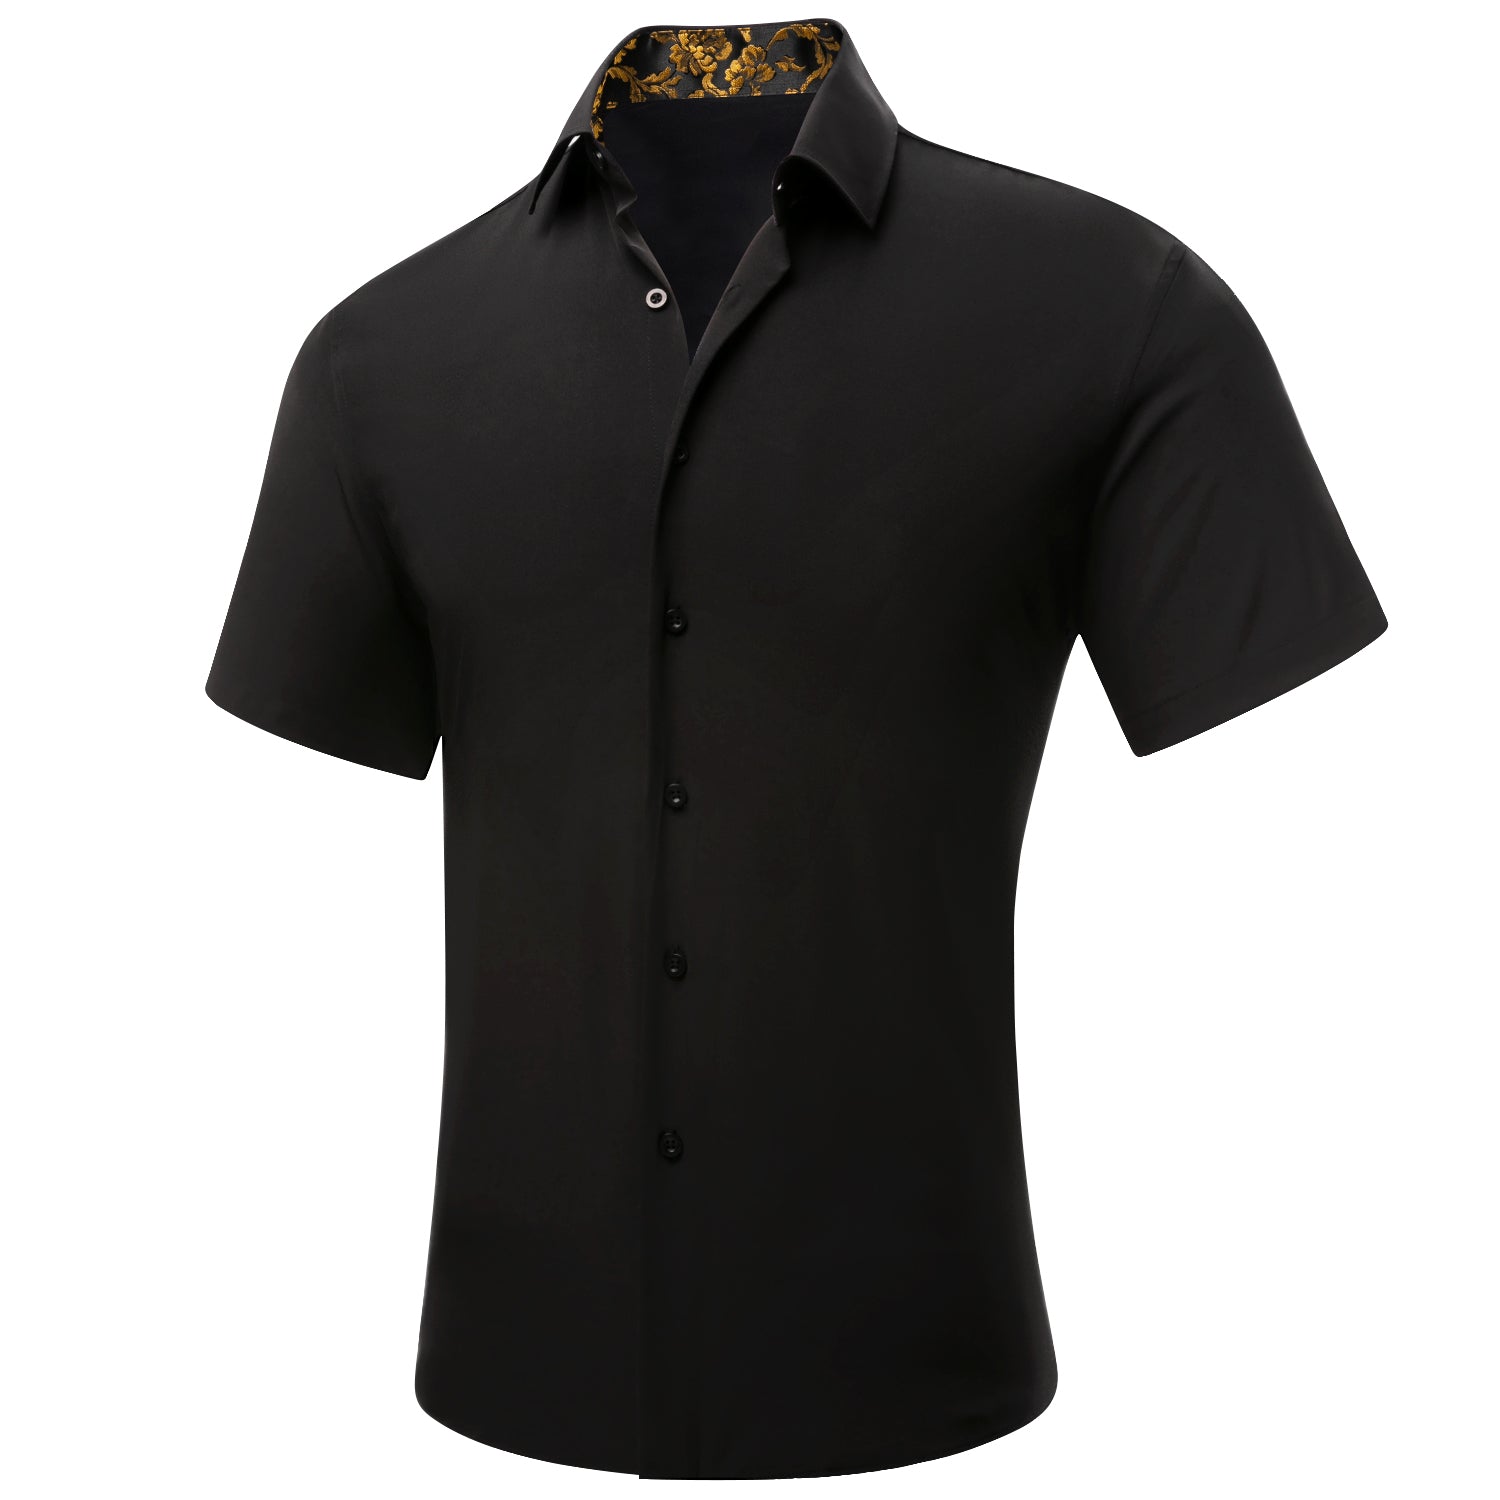 Black Solid with Gold Floral Collar Silk Men's Short Sleeve Shirt